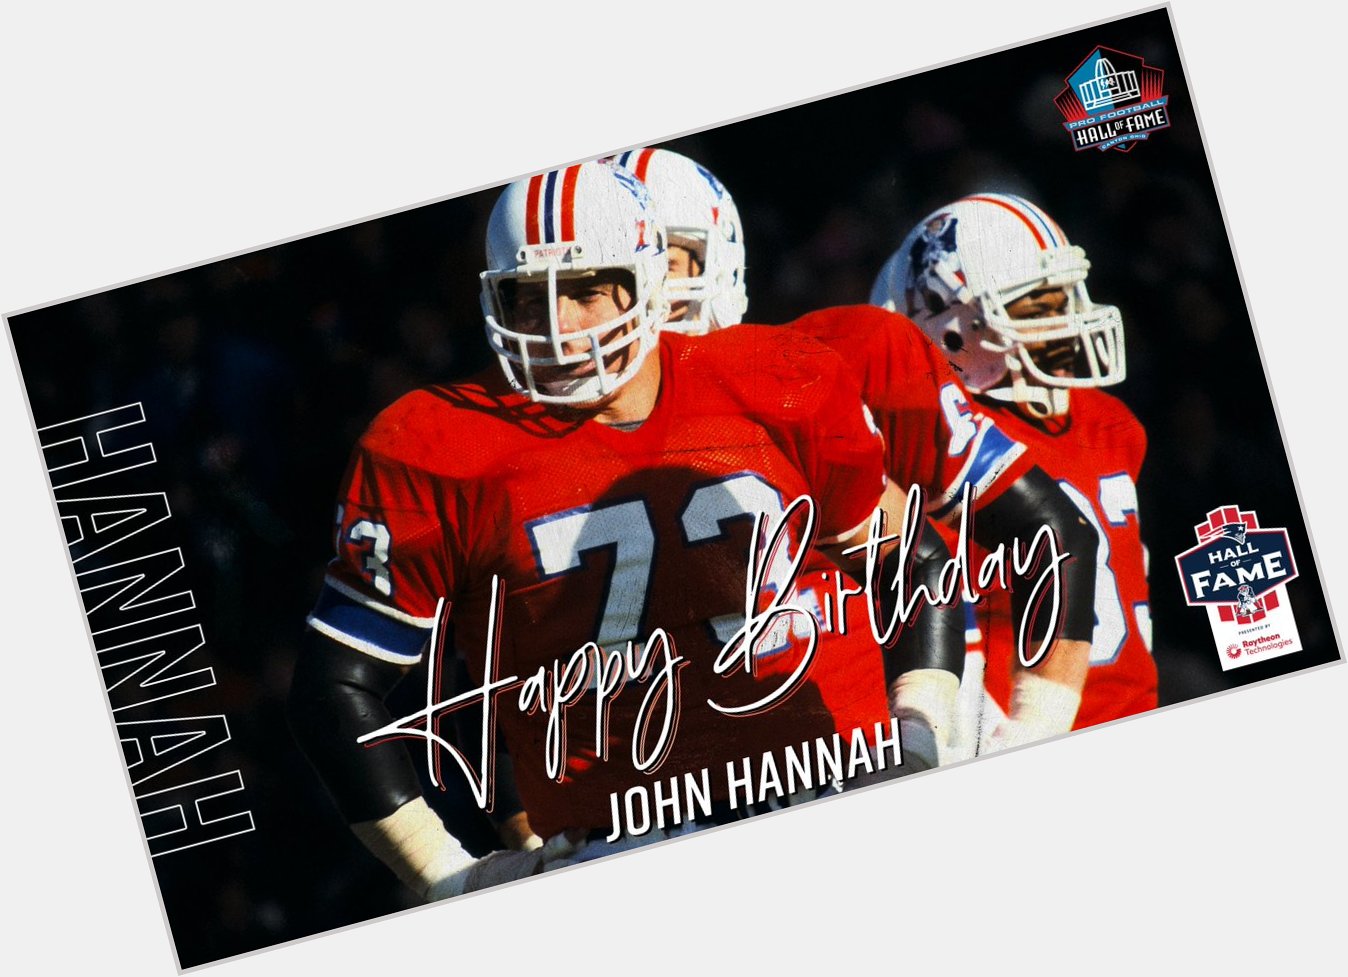 Happy birthday to the greatest offensive lineman of all time, John Hannah 